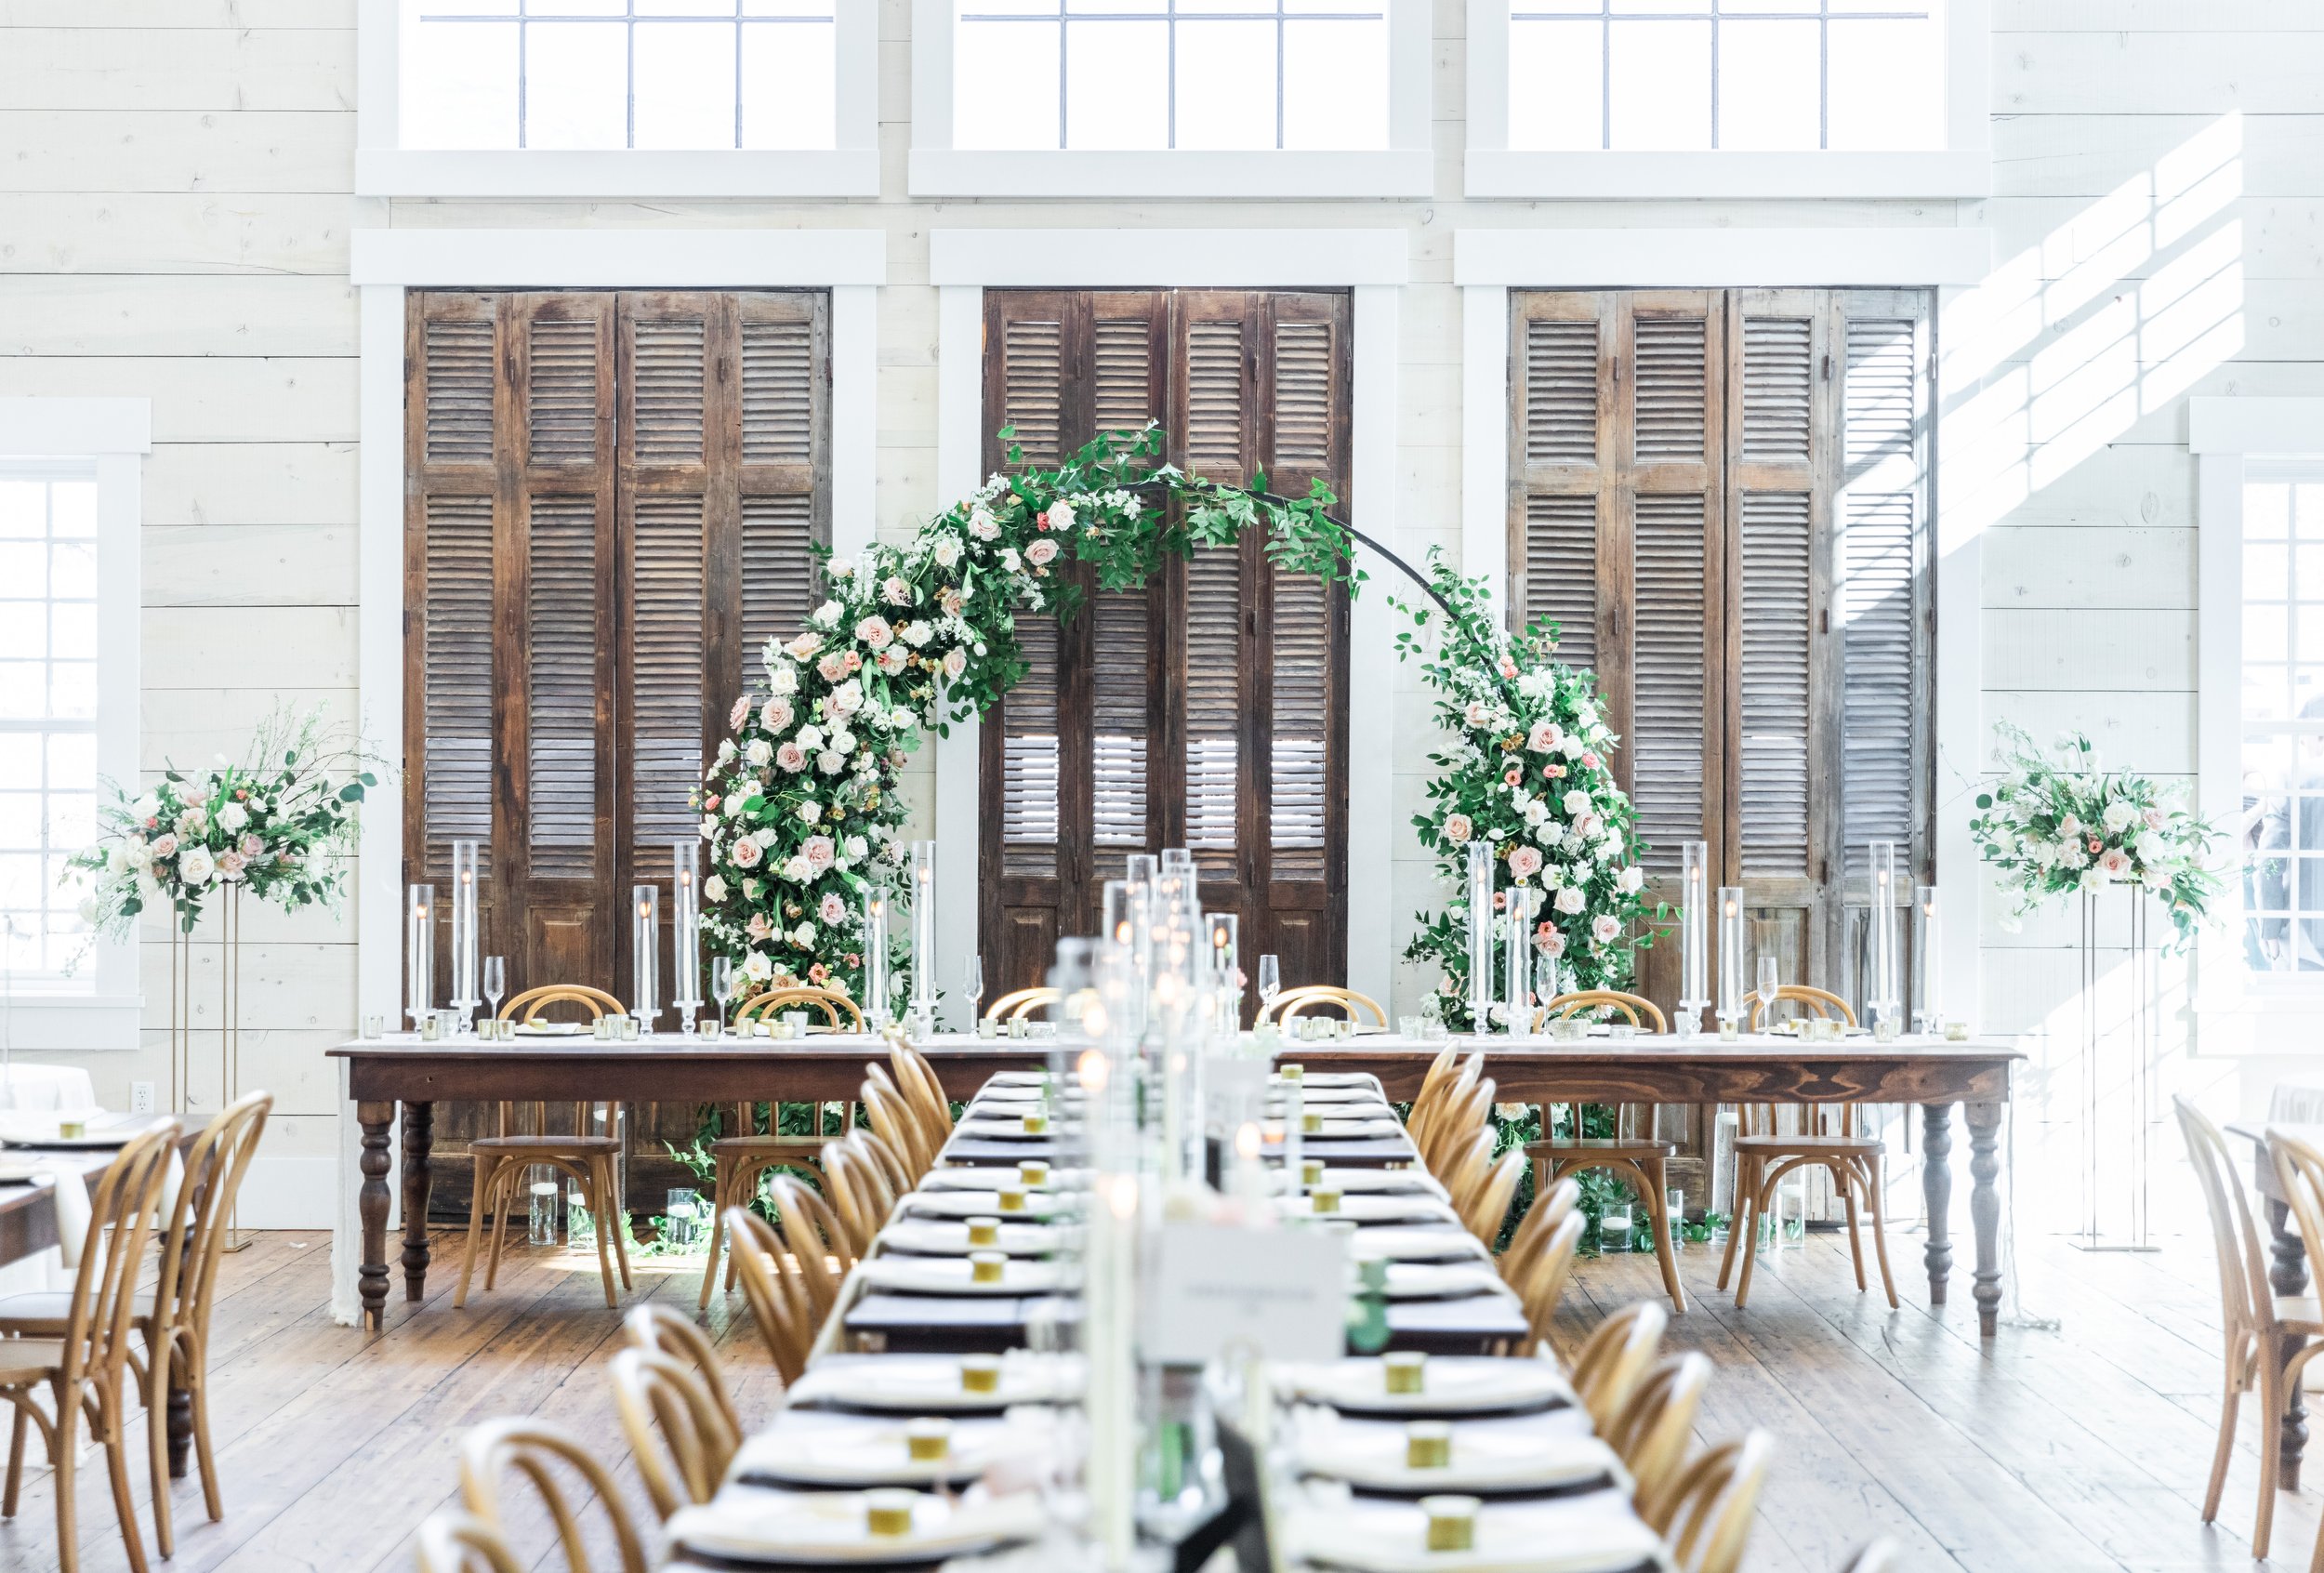  A bright and airy rustic wedding venue in Utah captured by Savanna Richardson Photography. rustic indoor wedding venue Utah bright venues #savannarichardsonphotography #weddingplannervsvenuecooridnator #weddingphotographer #weddingphotographersUtah 